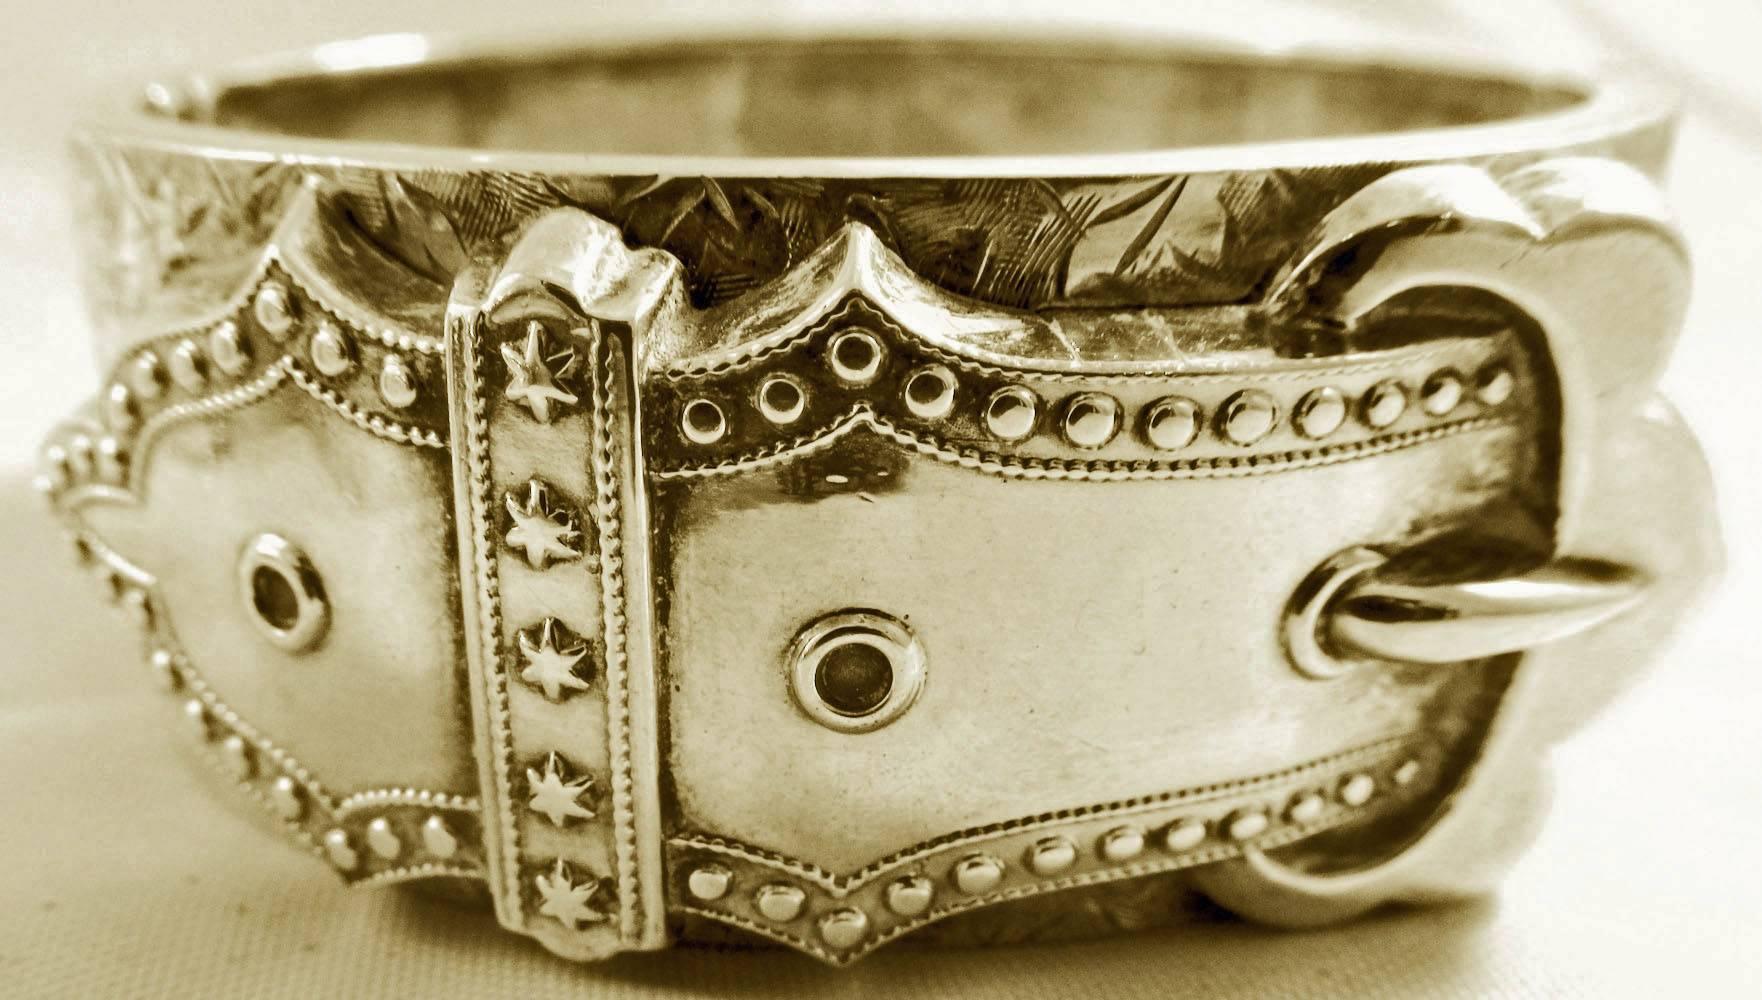 Wonderful Victorian buckle bracelet in sterling silver engraved with ivy leaves and decorated with stars and beads. The bangle is hallmarked for Birmingham in 1884 and measures 1" wide.  The interiors measurements are 1 15/16"by 
2